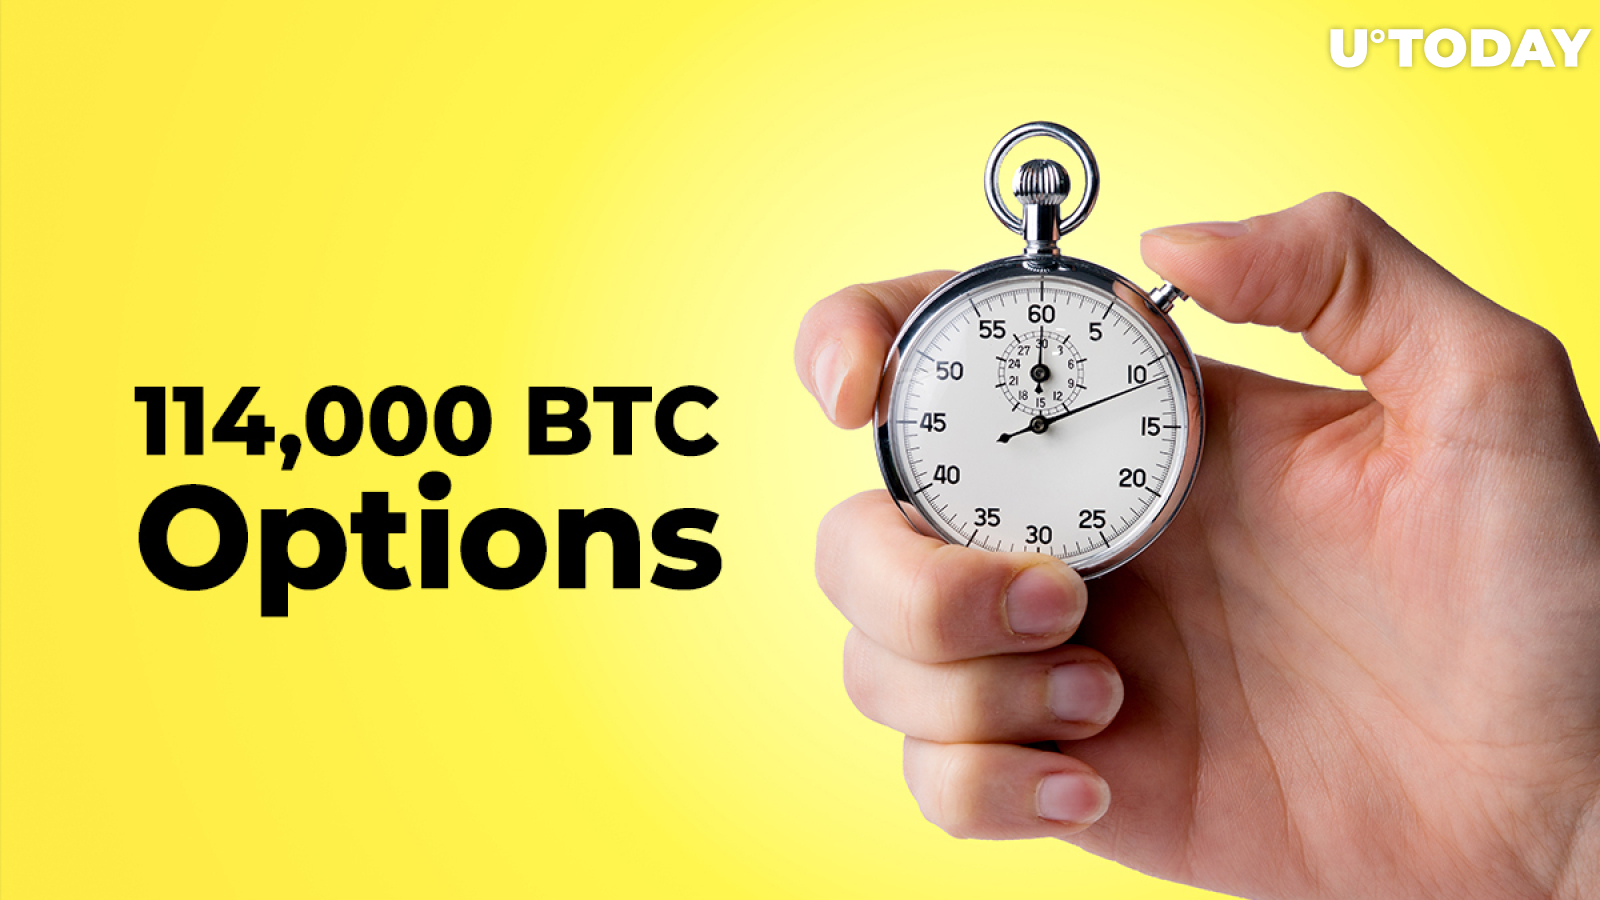 114,000 BTC Options to Expire This Week: Recent Skew Data